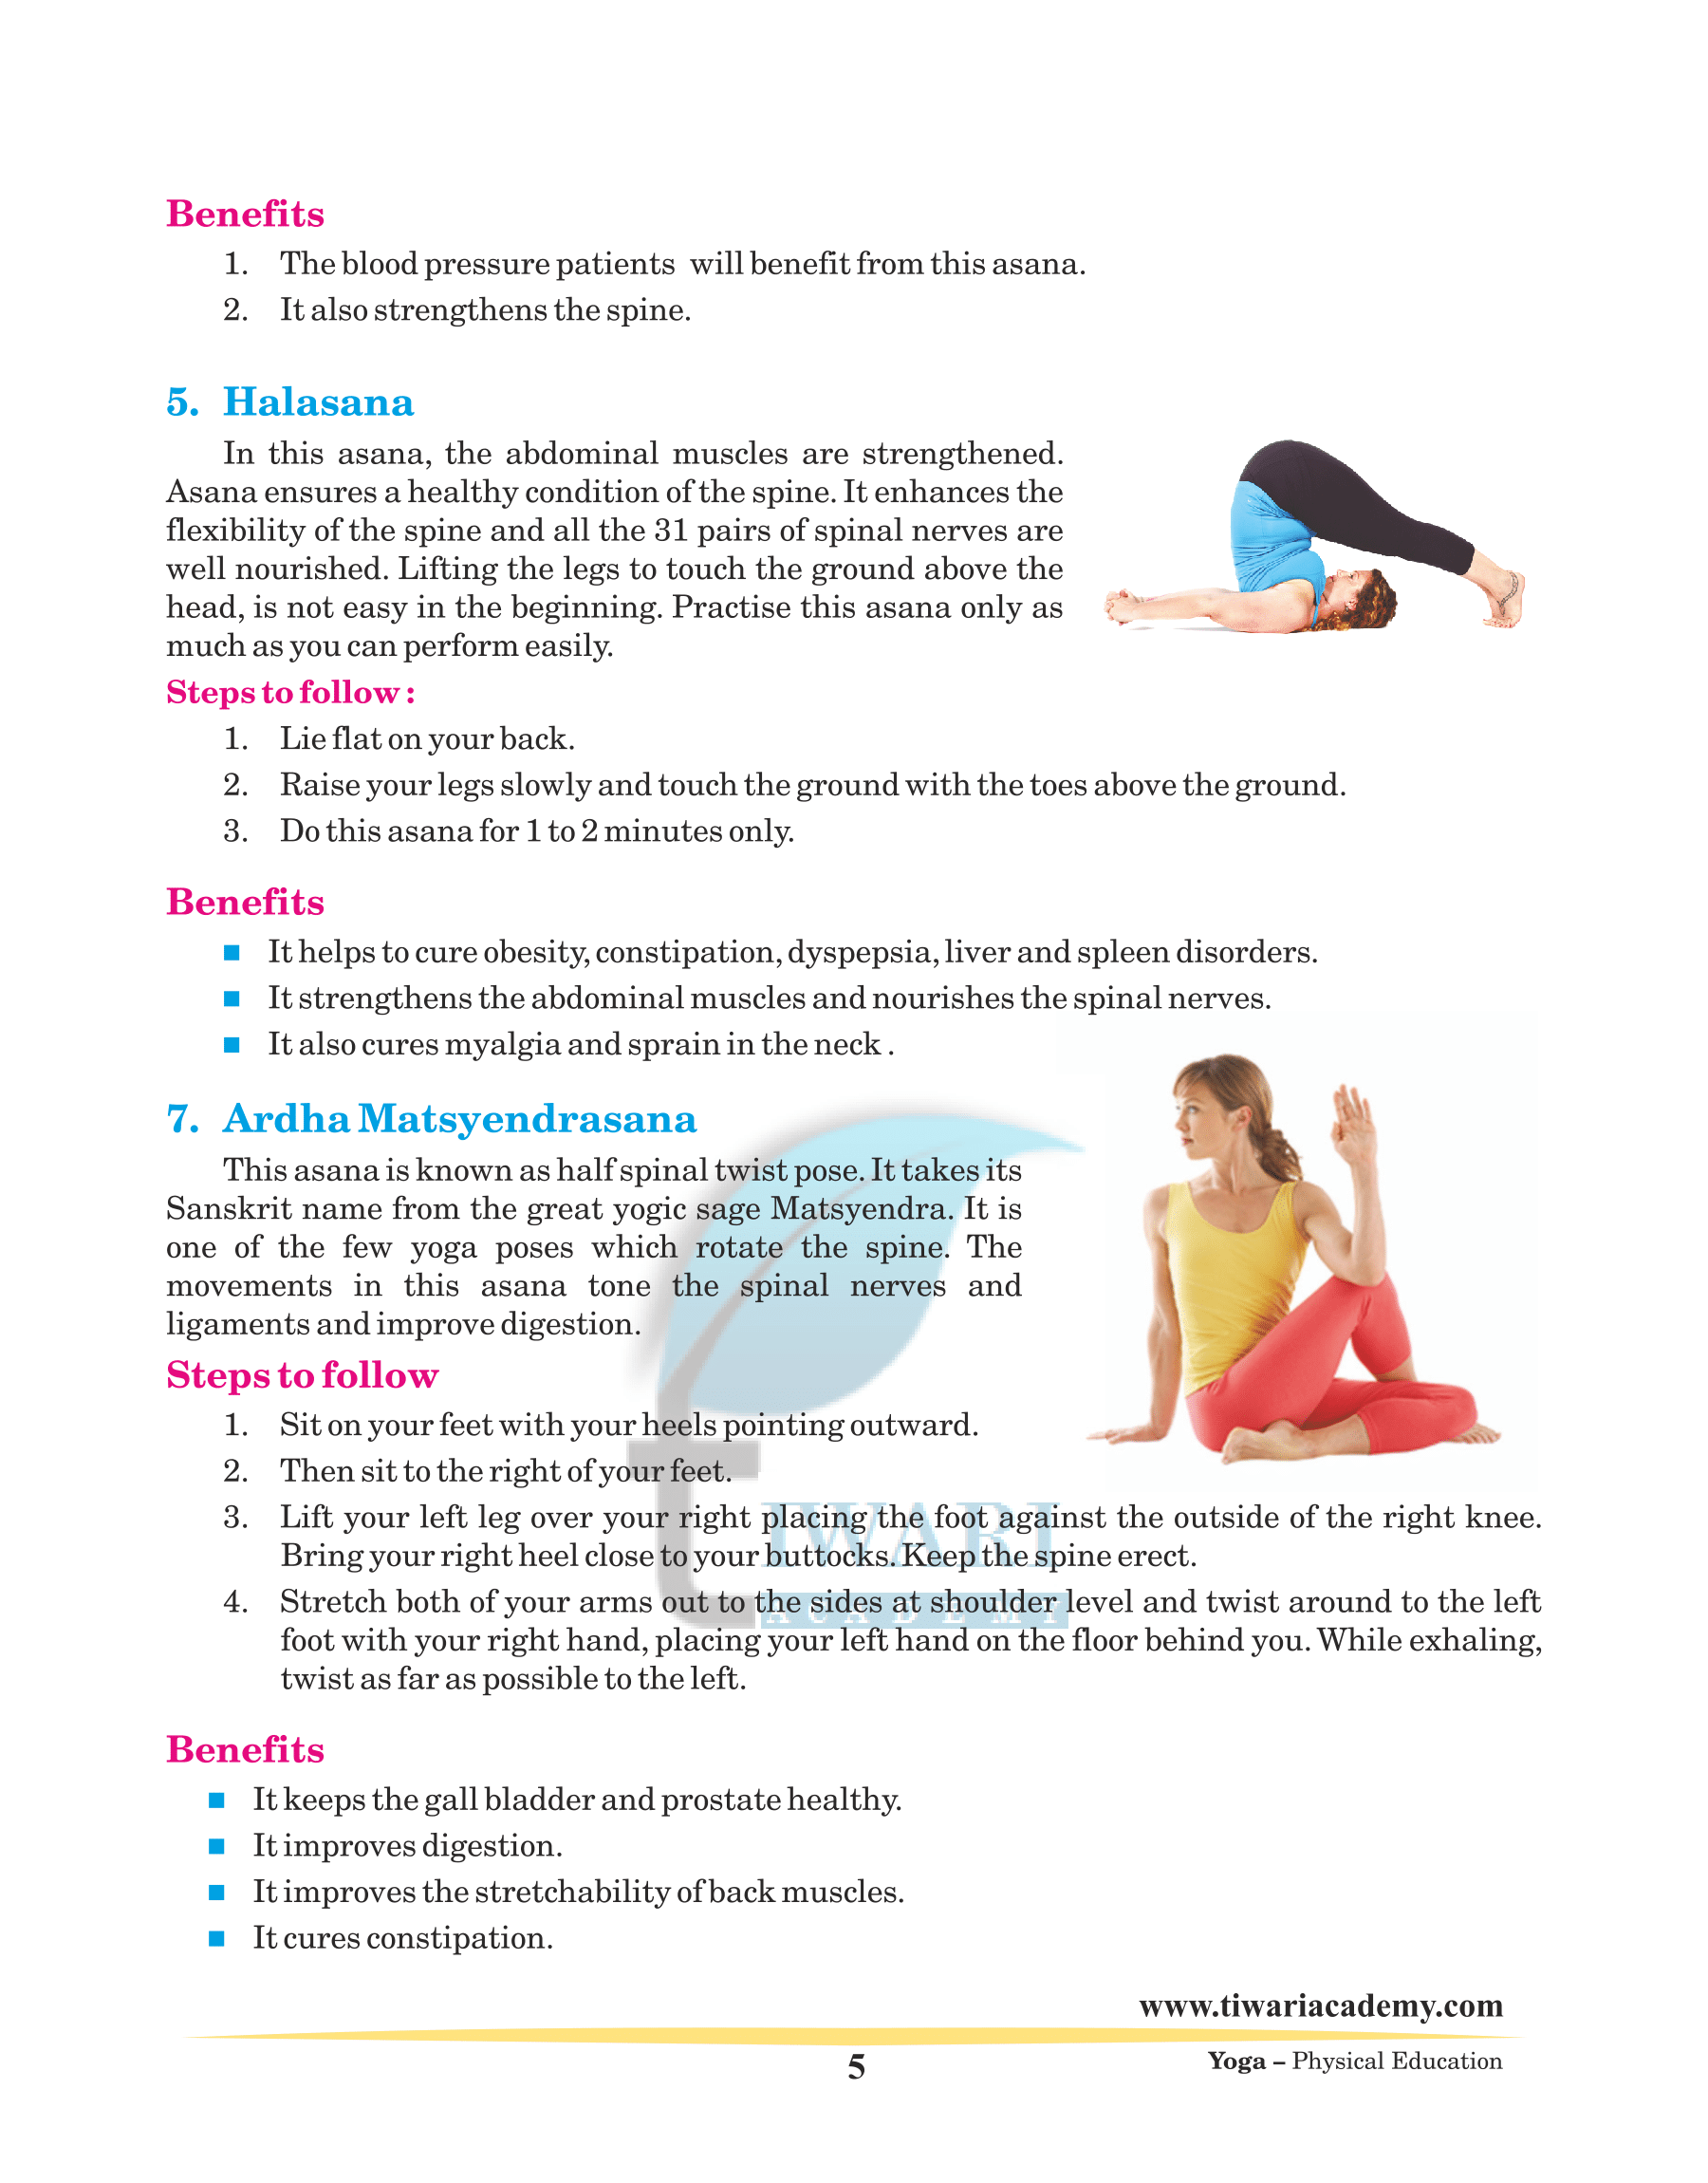 Different stages of Yoga